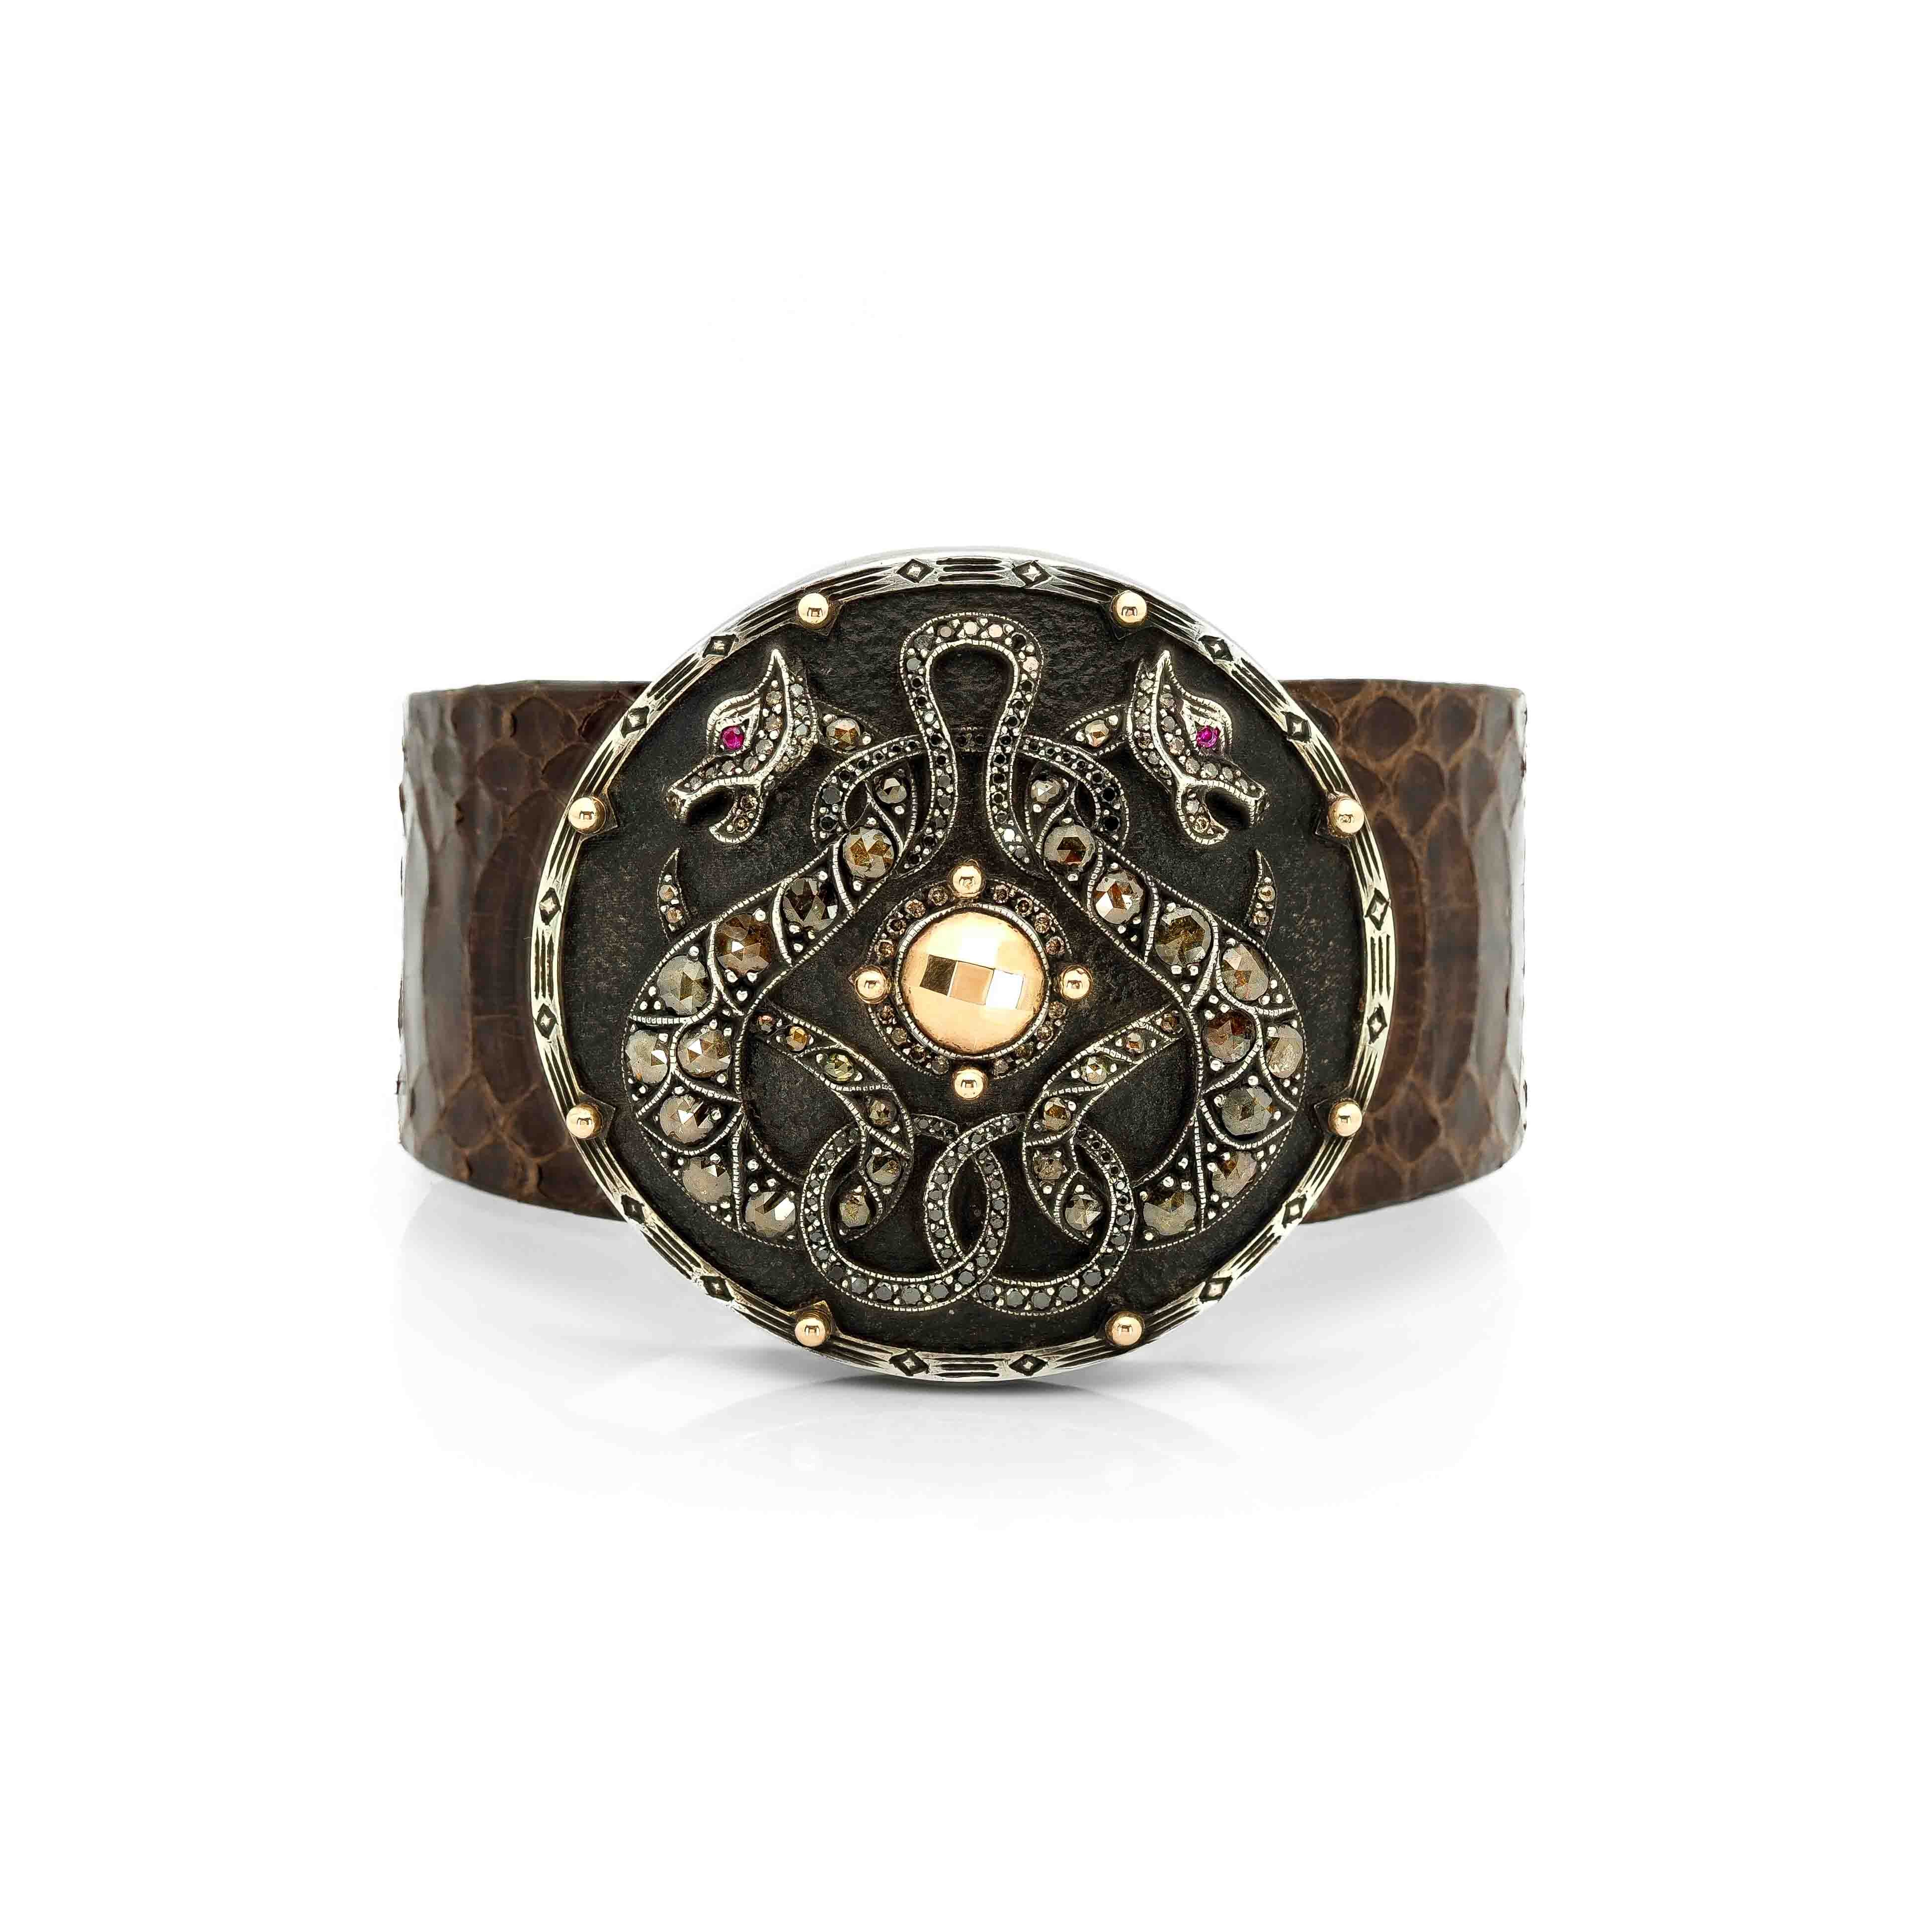 Taru Jewelry Dragon Shield Bracelet is a bold piece crafted from 18K gold and sterling silver. Featuring a majestic design of two dragons, it is adorned with brown rosecut diamonds and black diamonds.